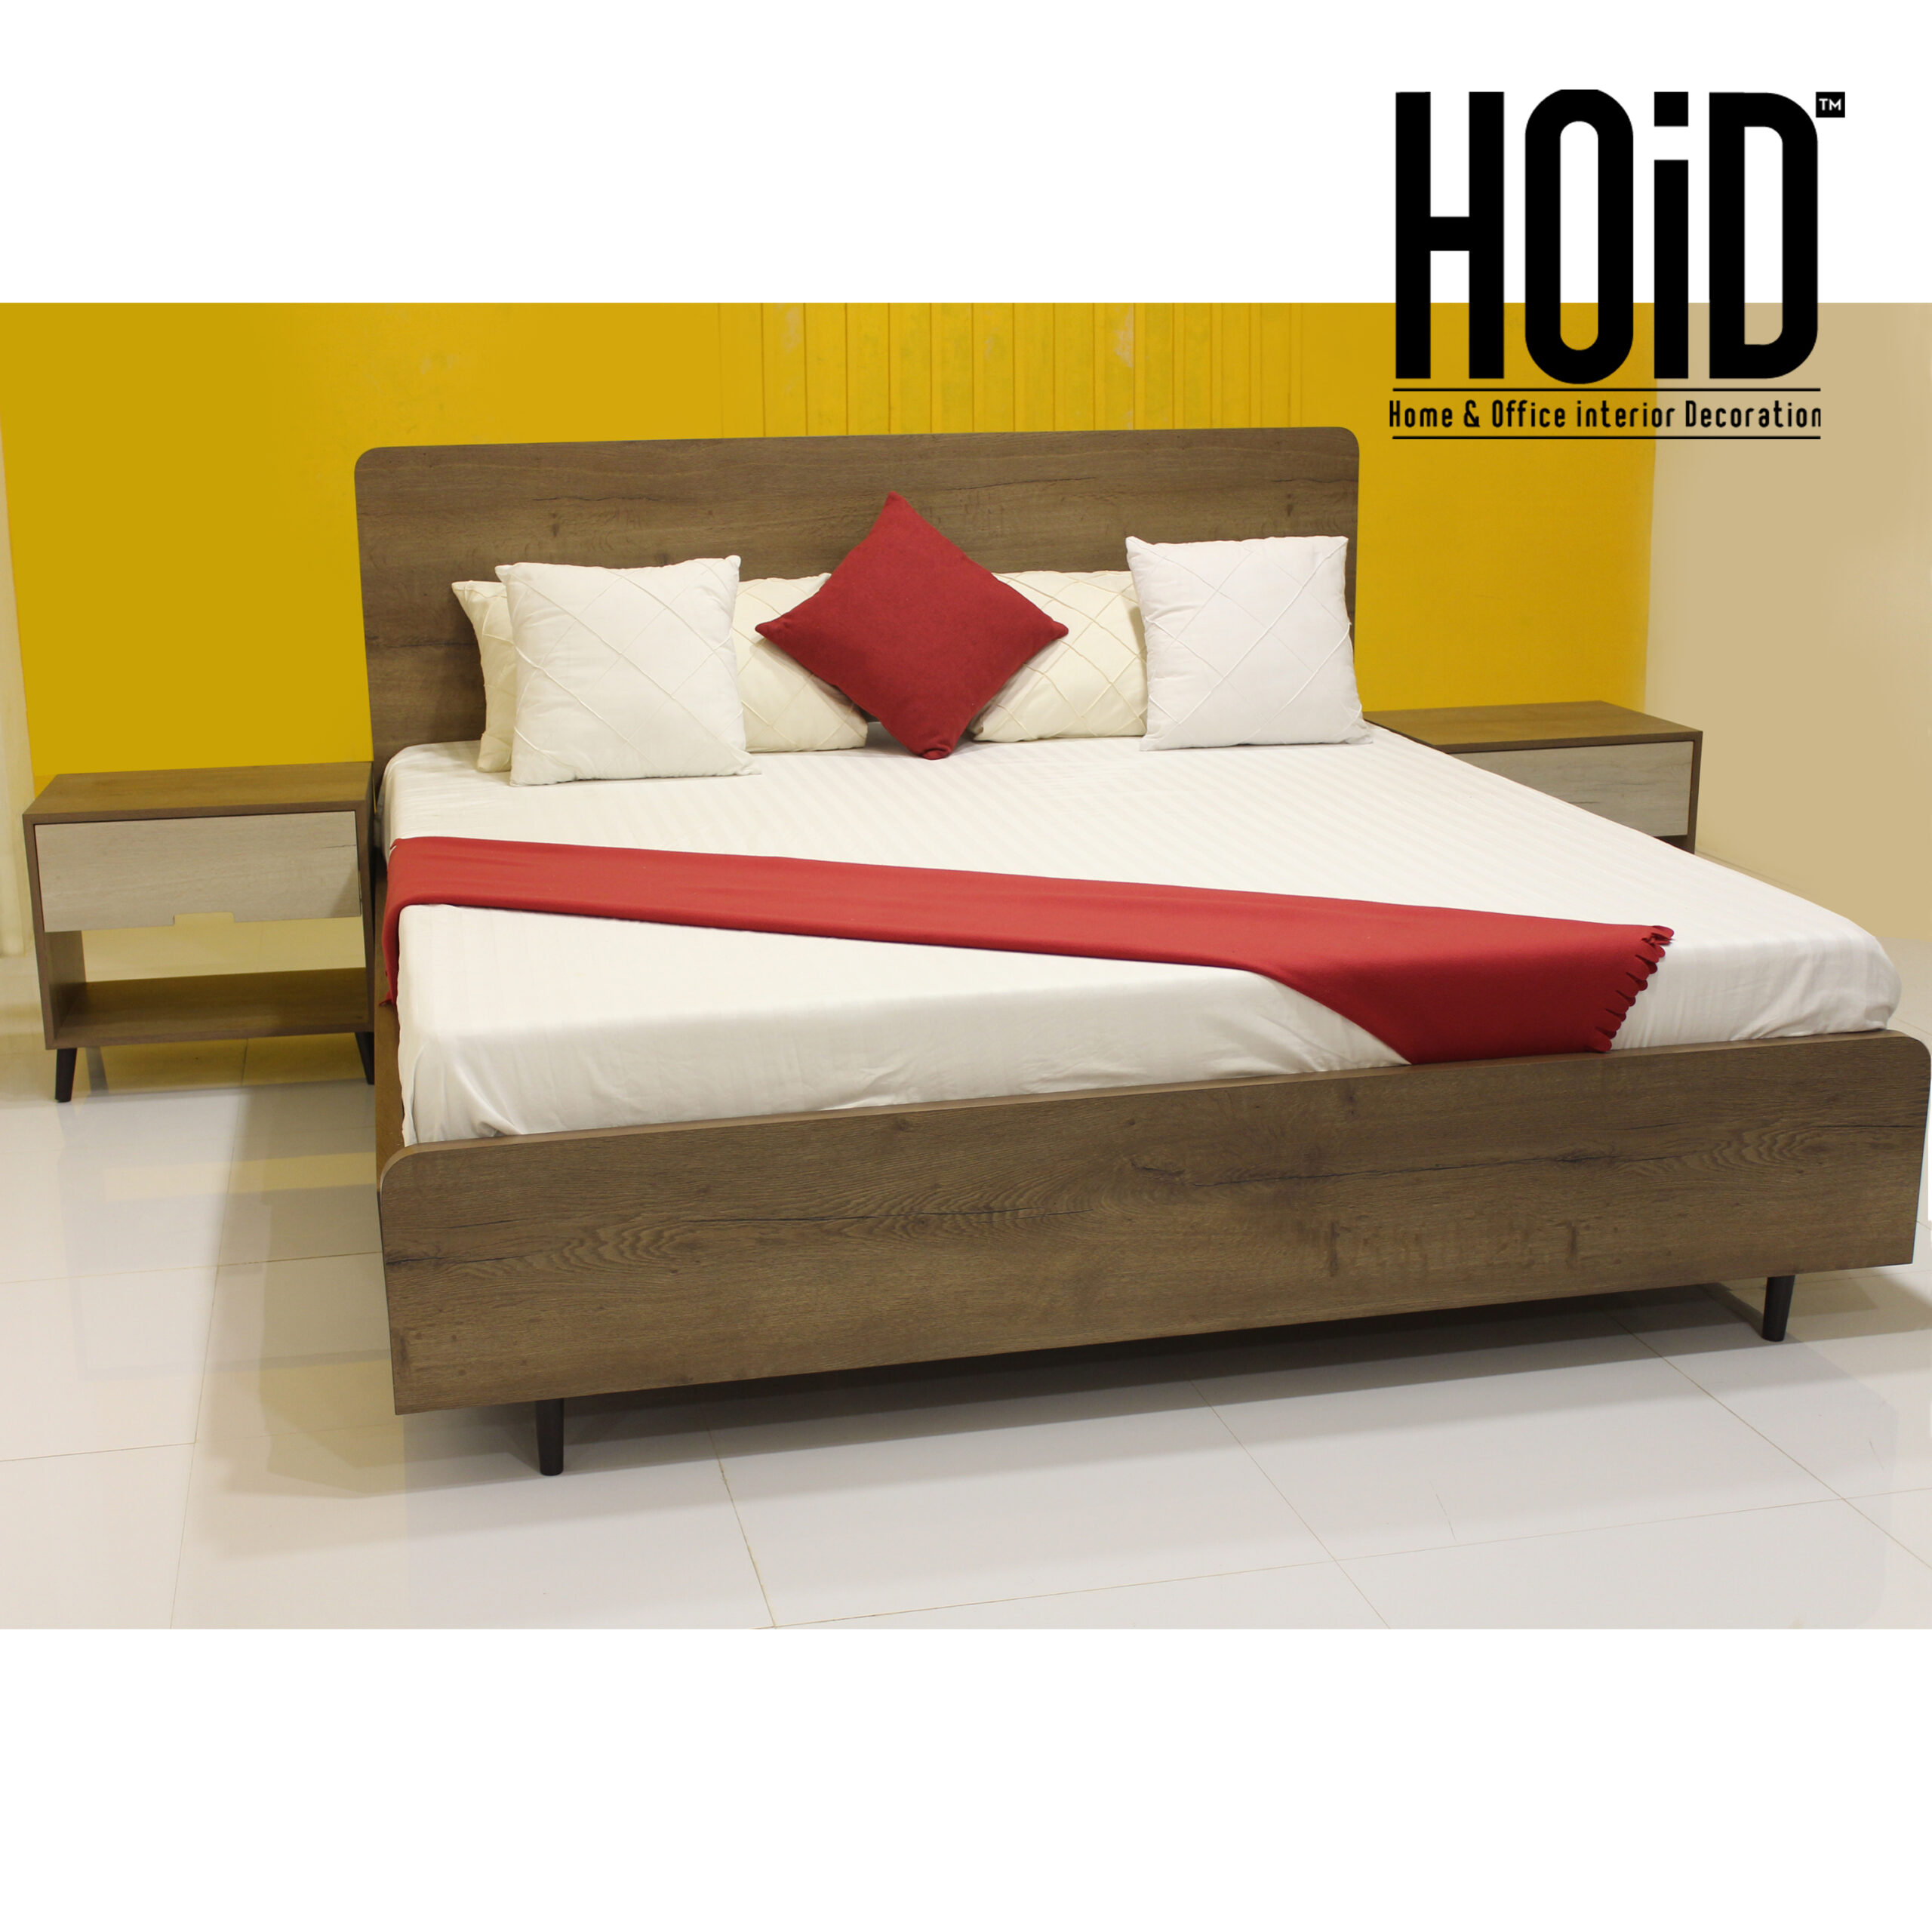 turn-bed-with-2-side-tables-scaled-2.jpg